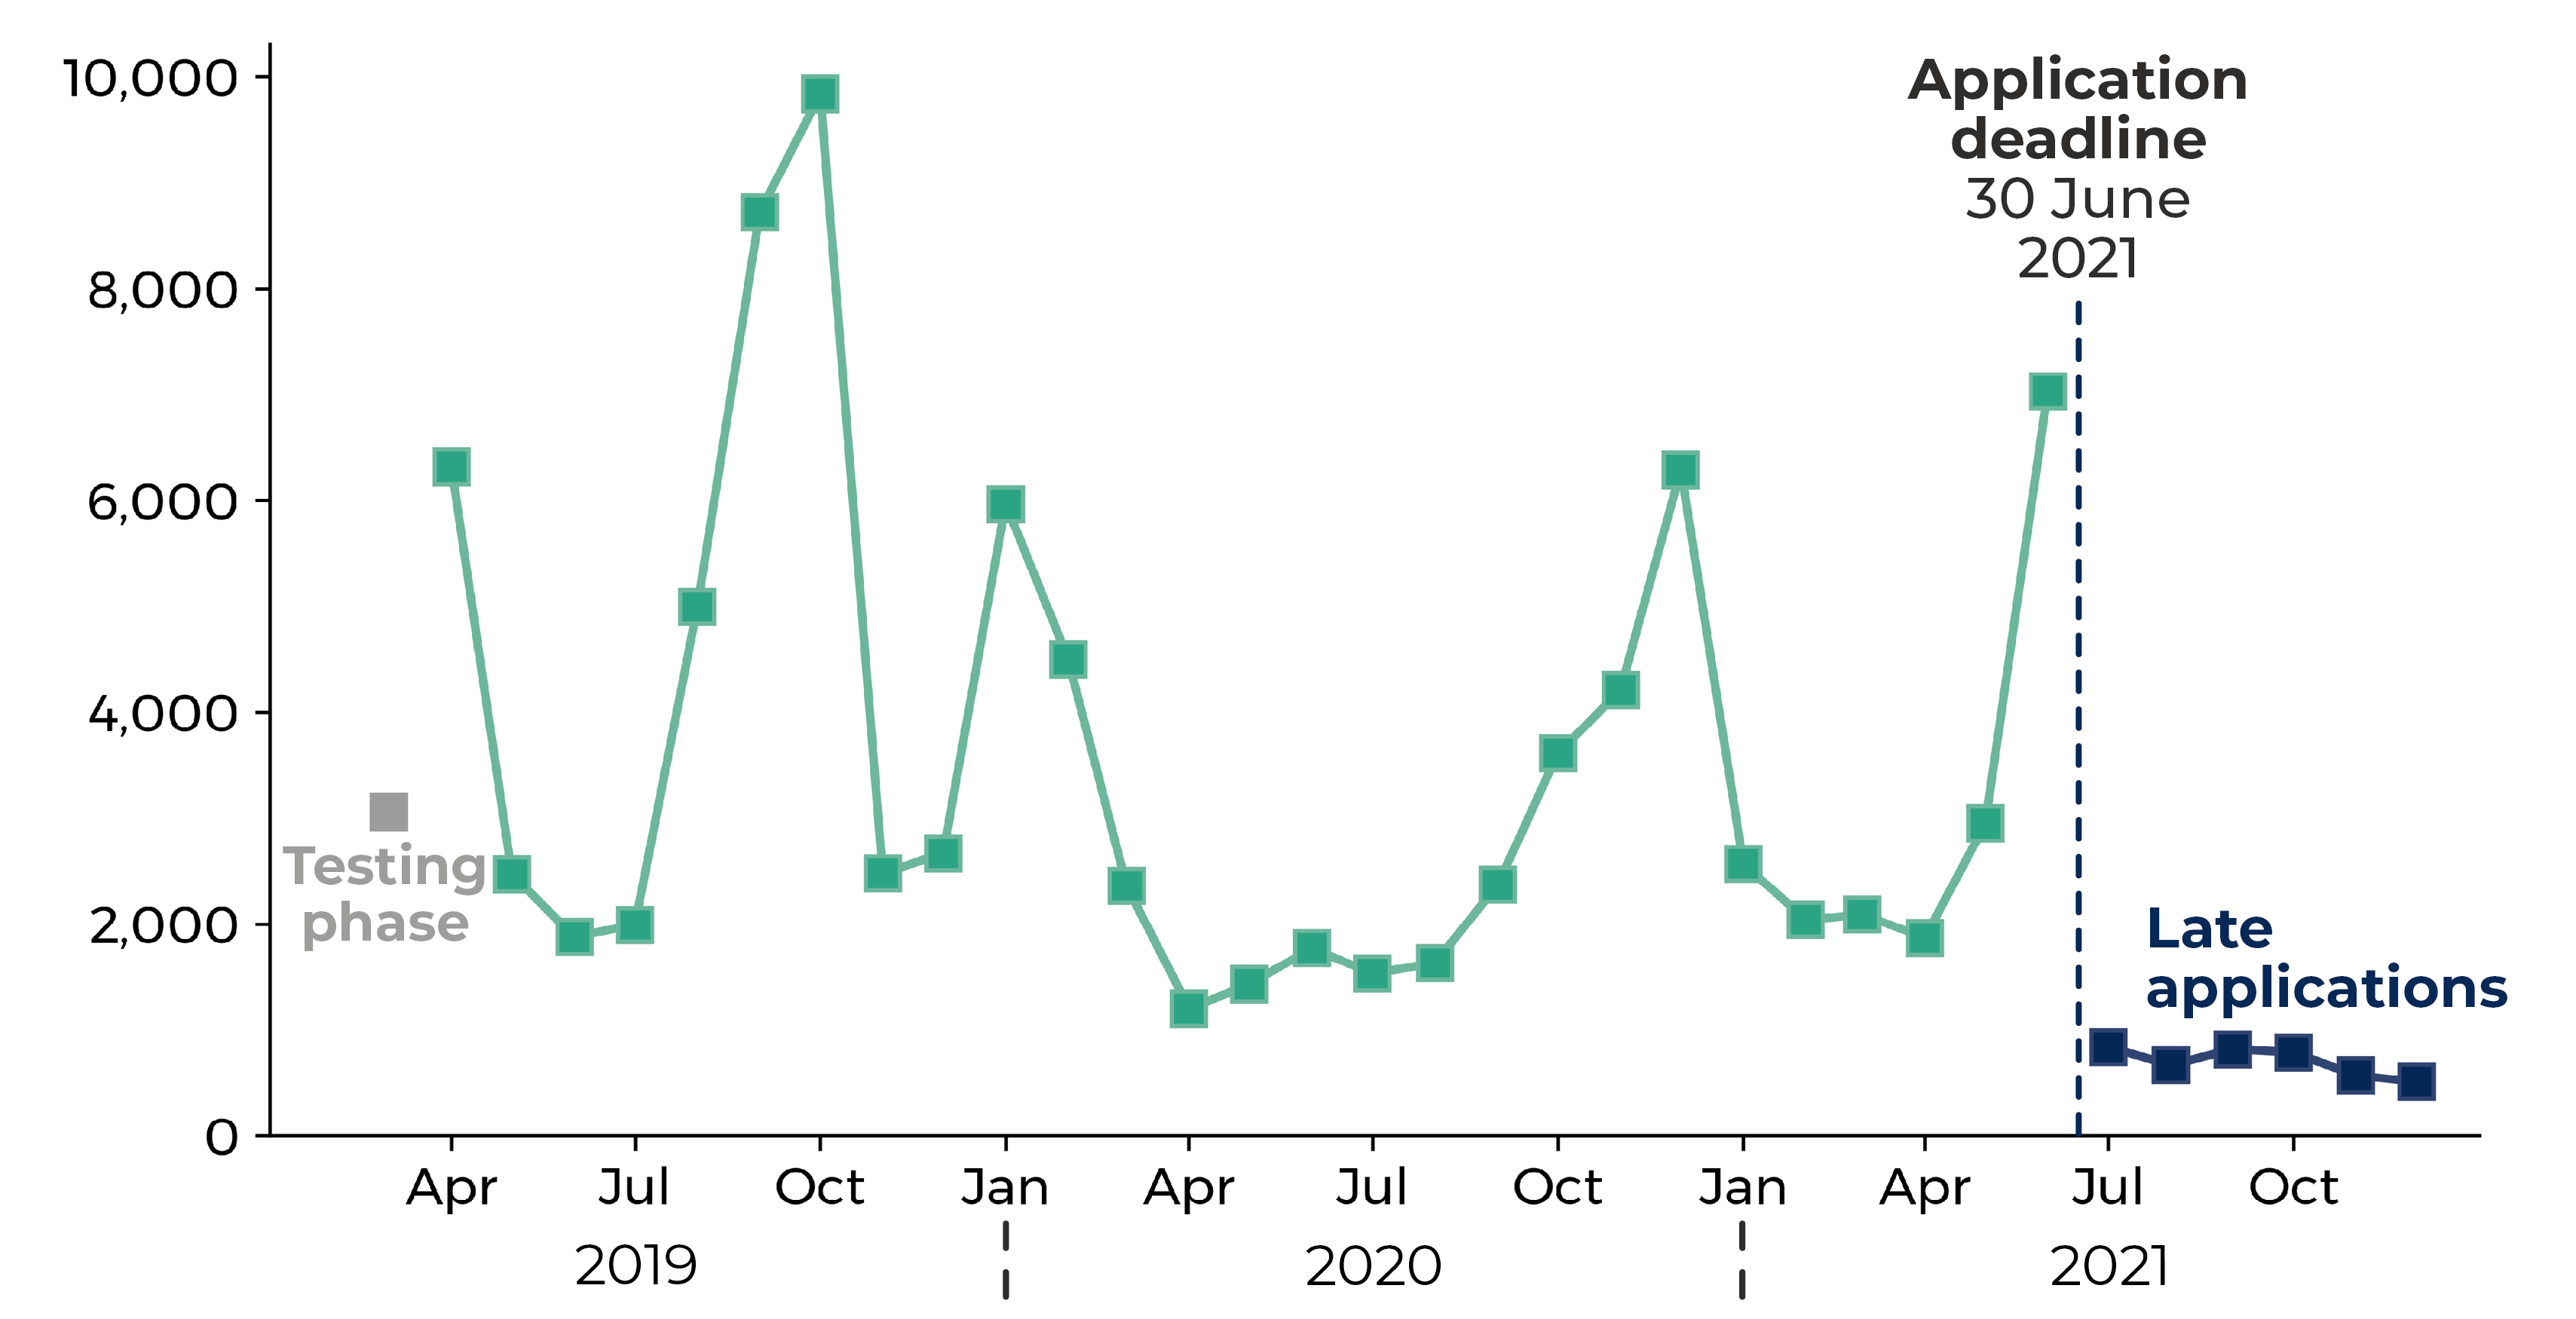 Graph showing the number of applications to the EUSS from Wales by month since the scheme opened in March 2019 until 31 December 2021. The number of applications varied between 1000 and 10000 and was at its highest (9840) in October 2019. Other peaks around 6000 to 7000 monthly applications occurred in April 2019, January 2020, December 2020 and June 2021. Late applications in the 6 months beyond the 30 June 2021 deadline were less than 1000 per month.